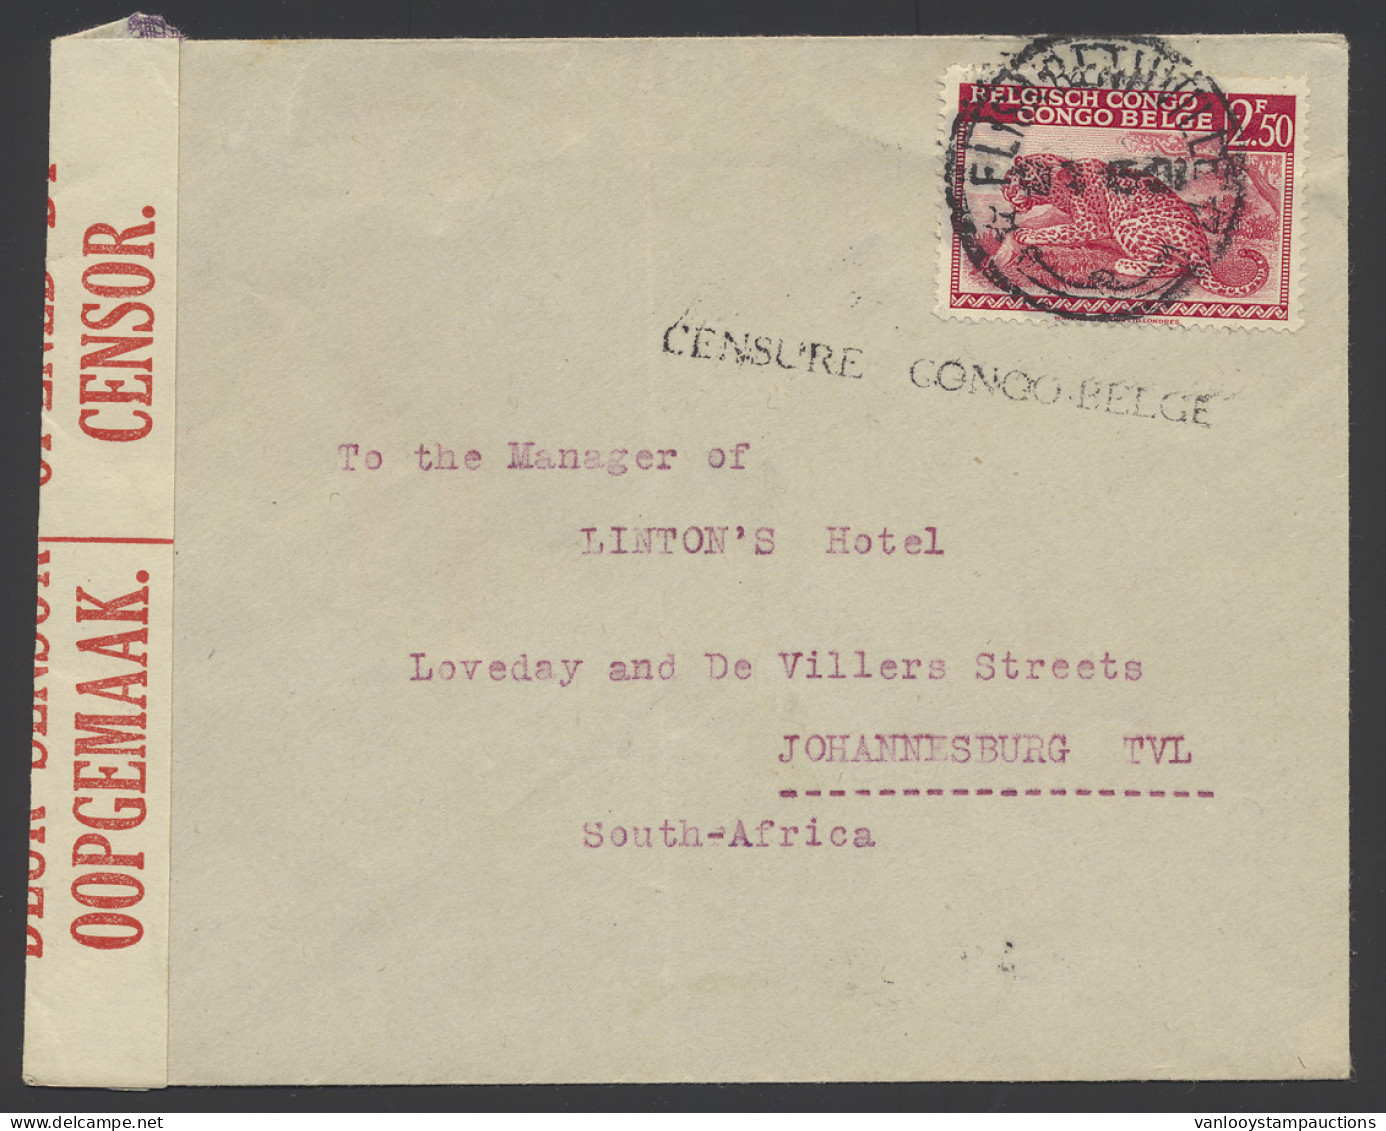 1945 Cover Franked With OBP N° 241 Sent From Elisabethville To Johannesburg/South Africa, Linear Censor Mark CENSURE CON - Briefe U. Dokumente